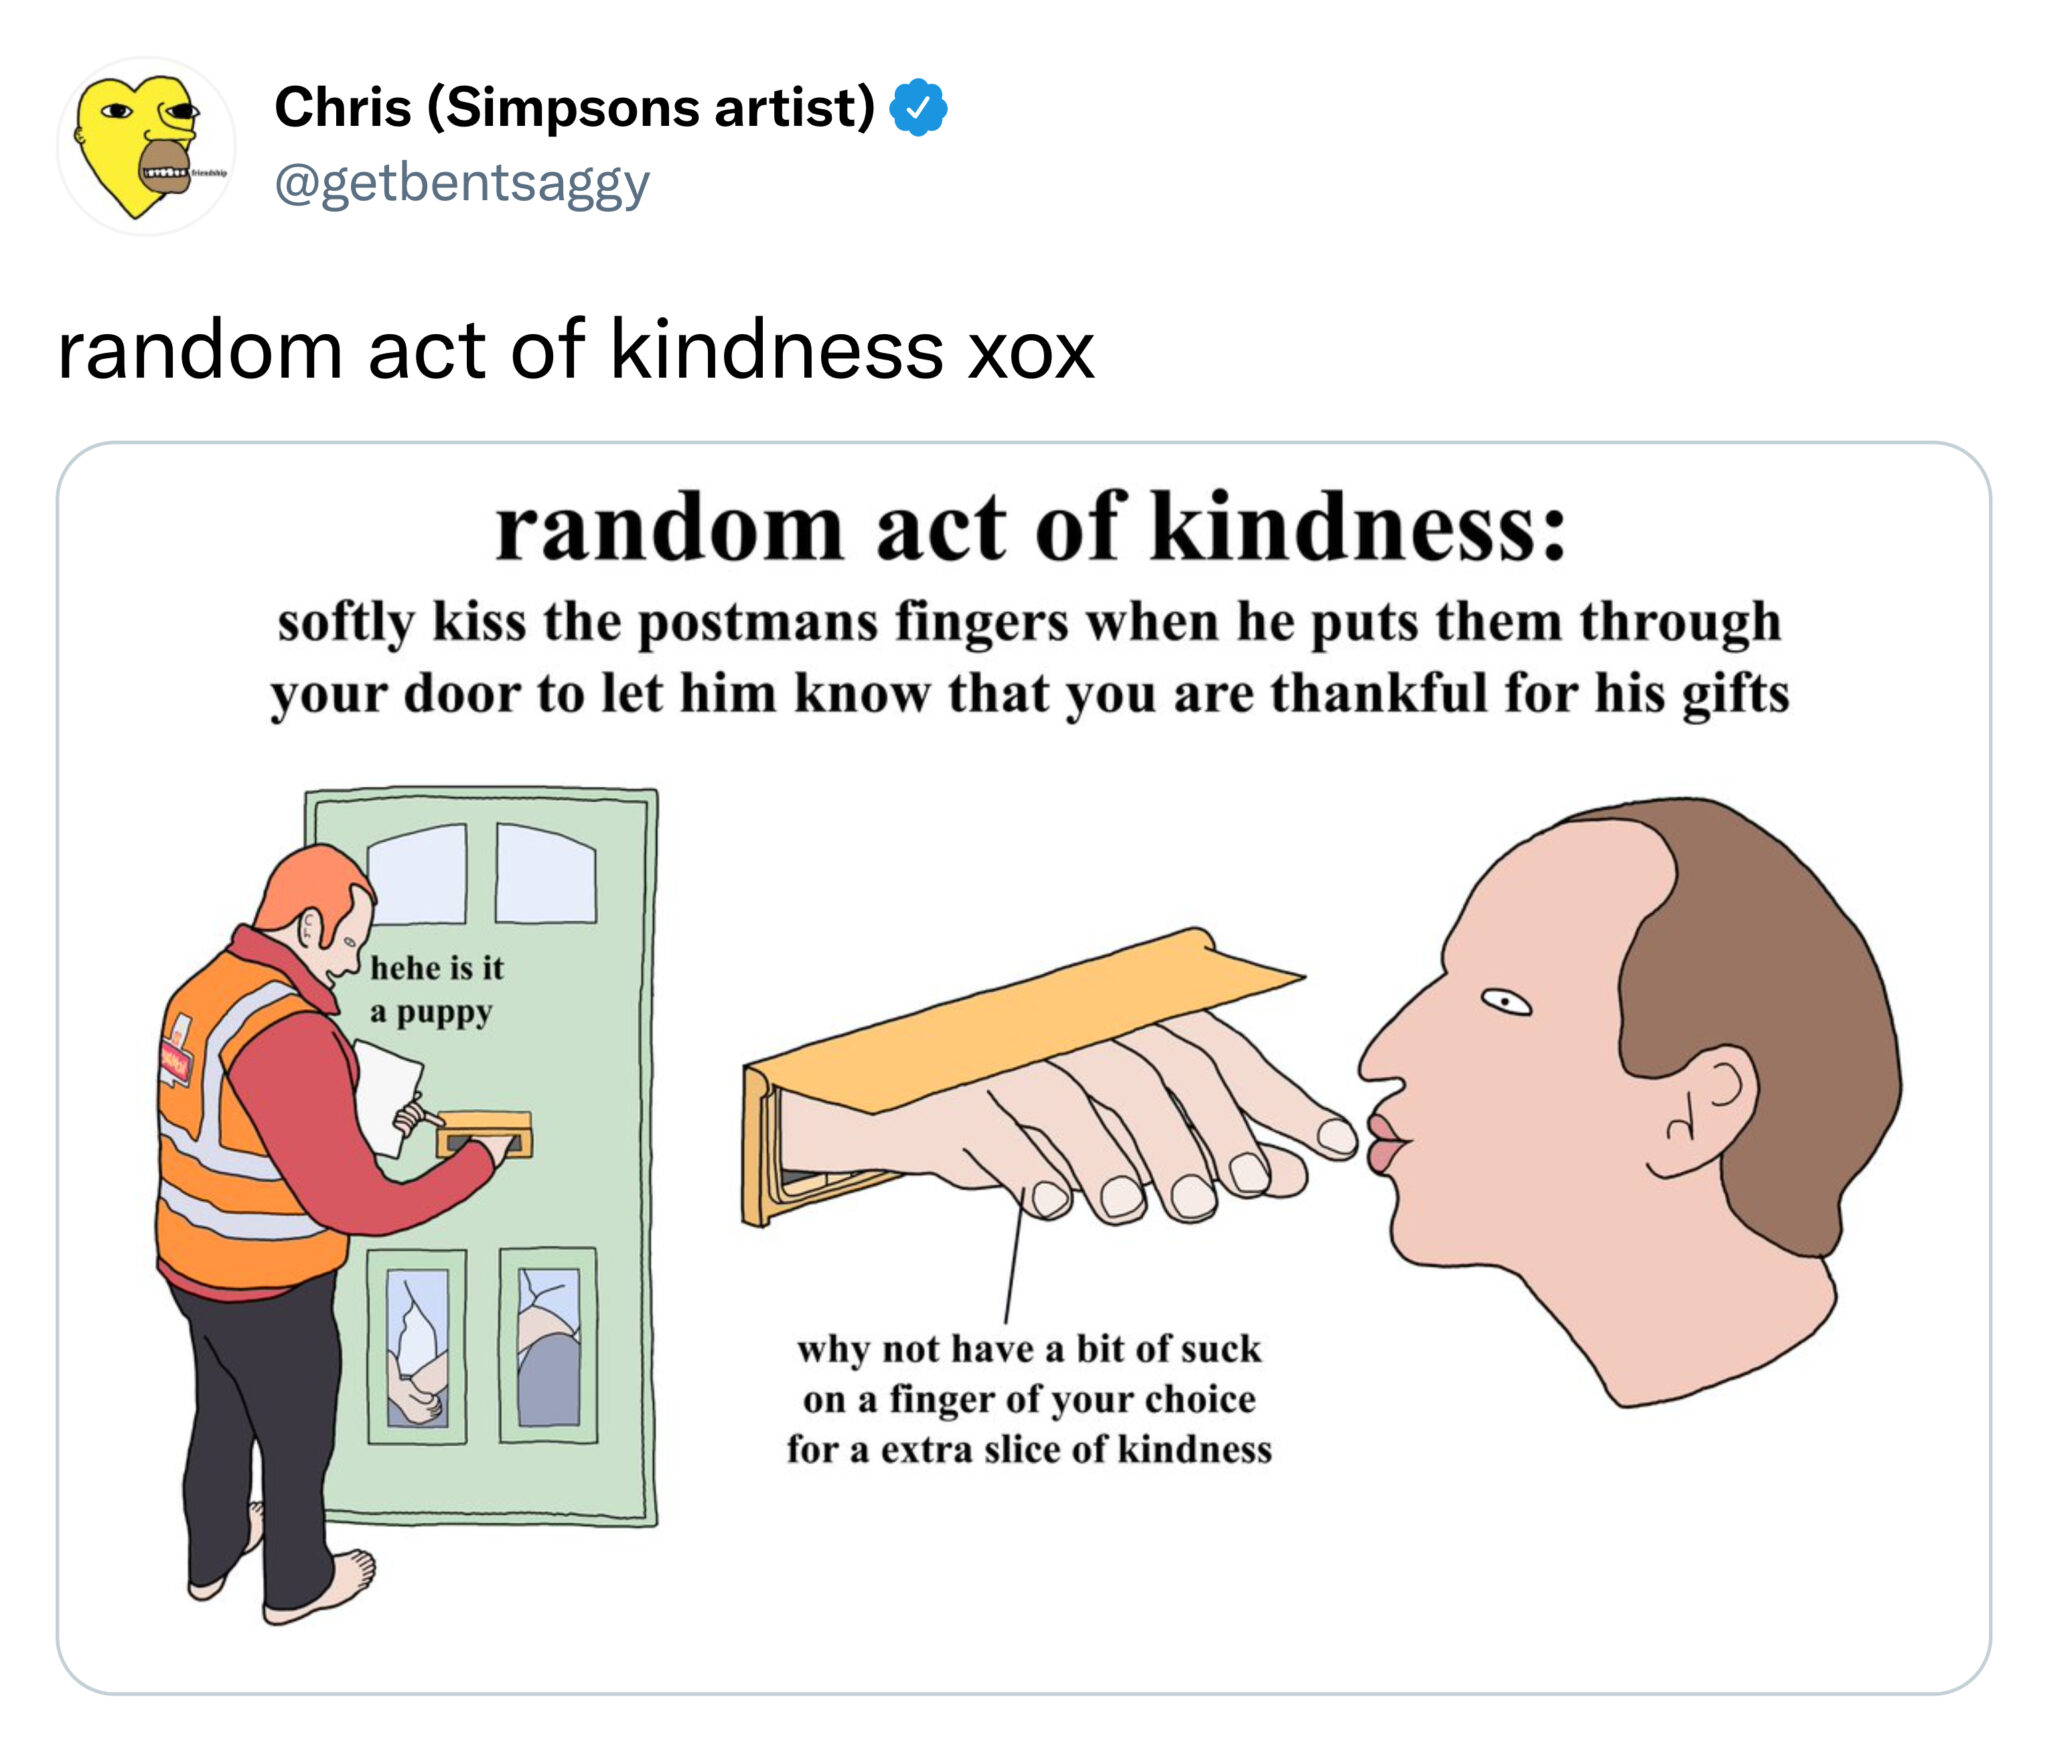 tweets of the week - random act of kindness softly kiss the postmans fingers - Chris Simpsons artist med tre random act of kindness xox random act of kindness softly kiss the postmans fingers when he puts them through your door to let him know that you ar